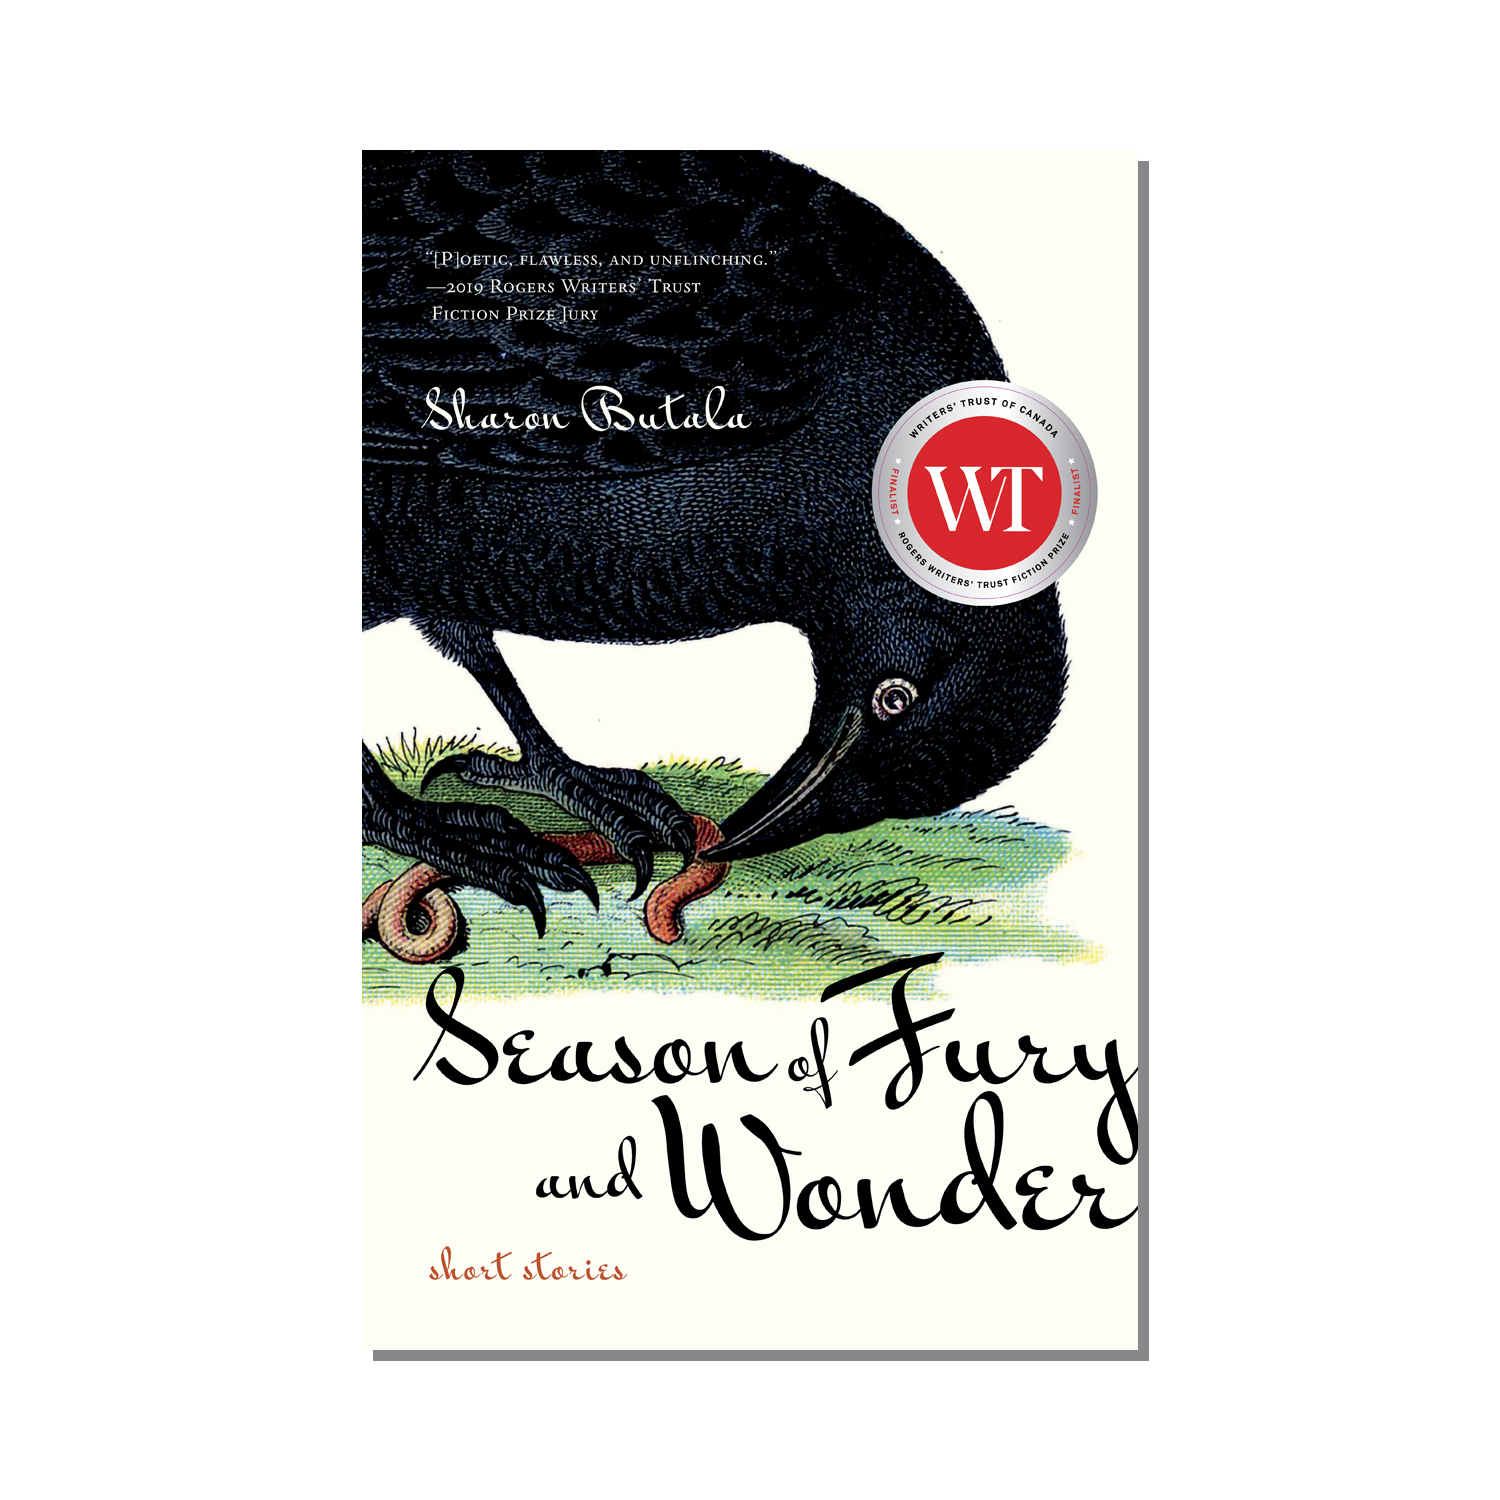 Book cover for Season of Fury and Wonder by Sharon Butala.